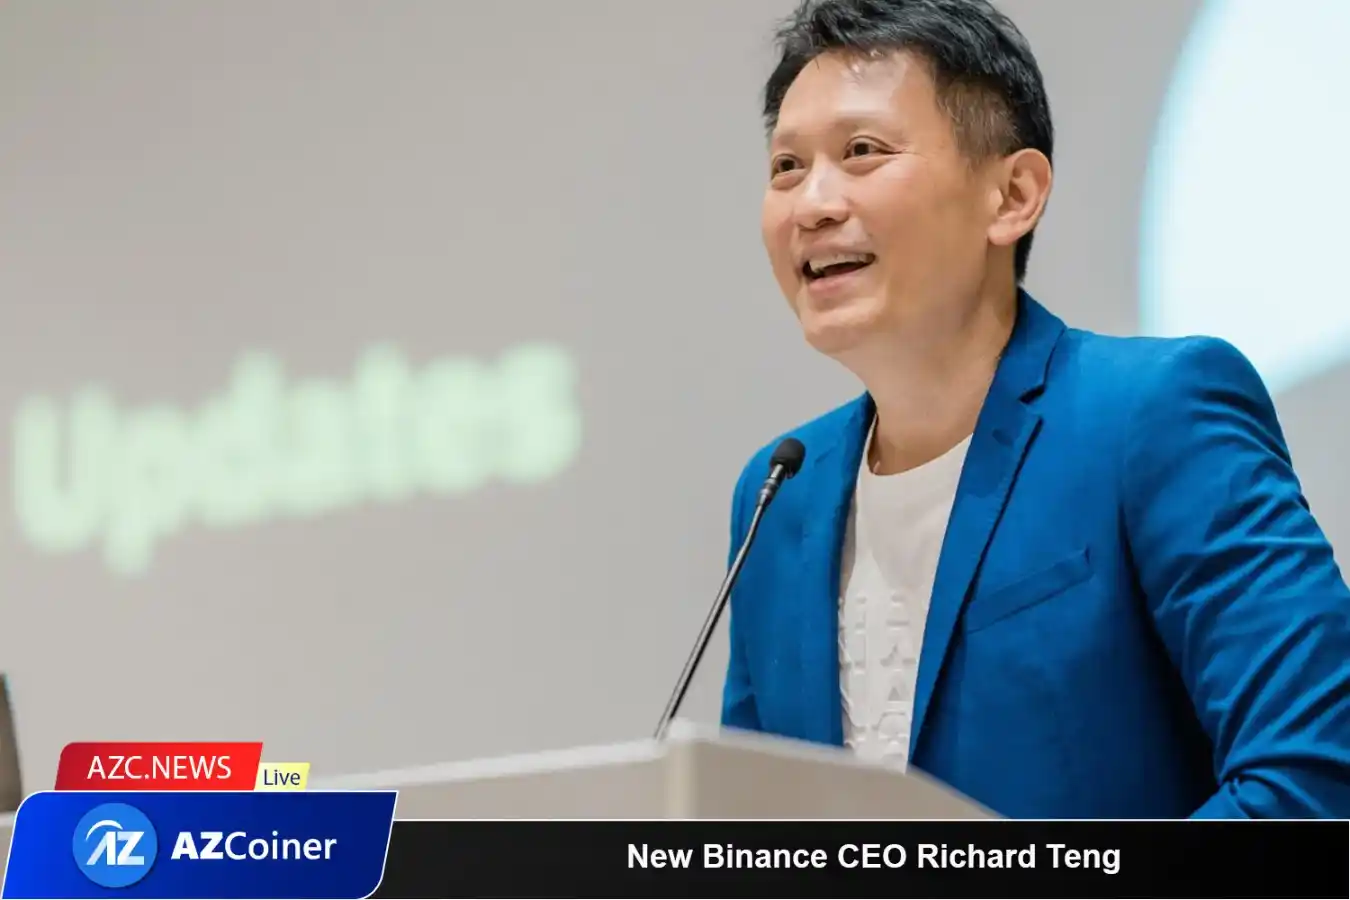 New Binance Ceo Richard Teng Refused To Reveal The Location Of The Company’s Headquarters_65b97d36c71ce.webp